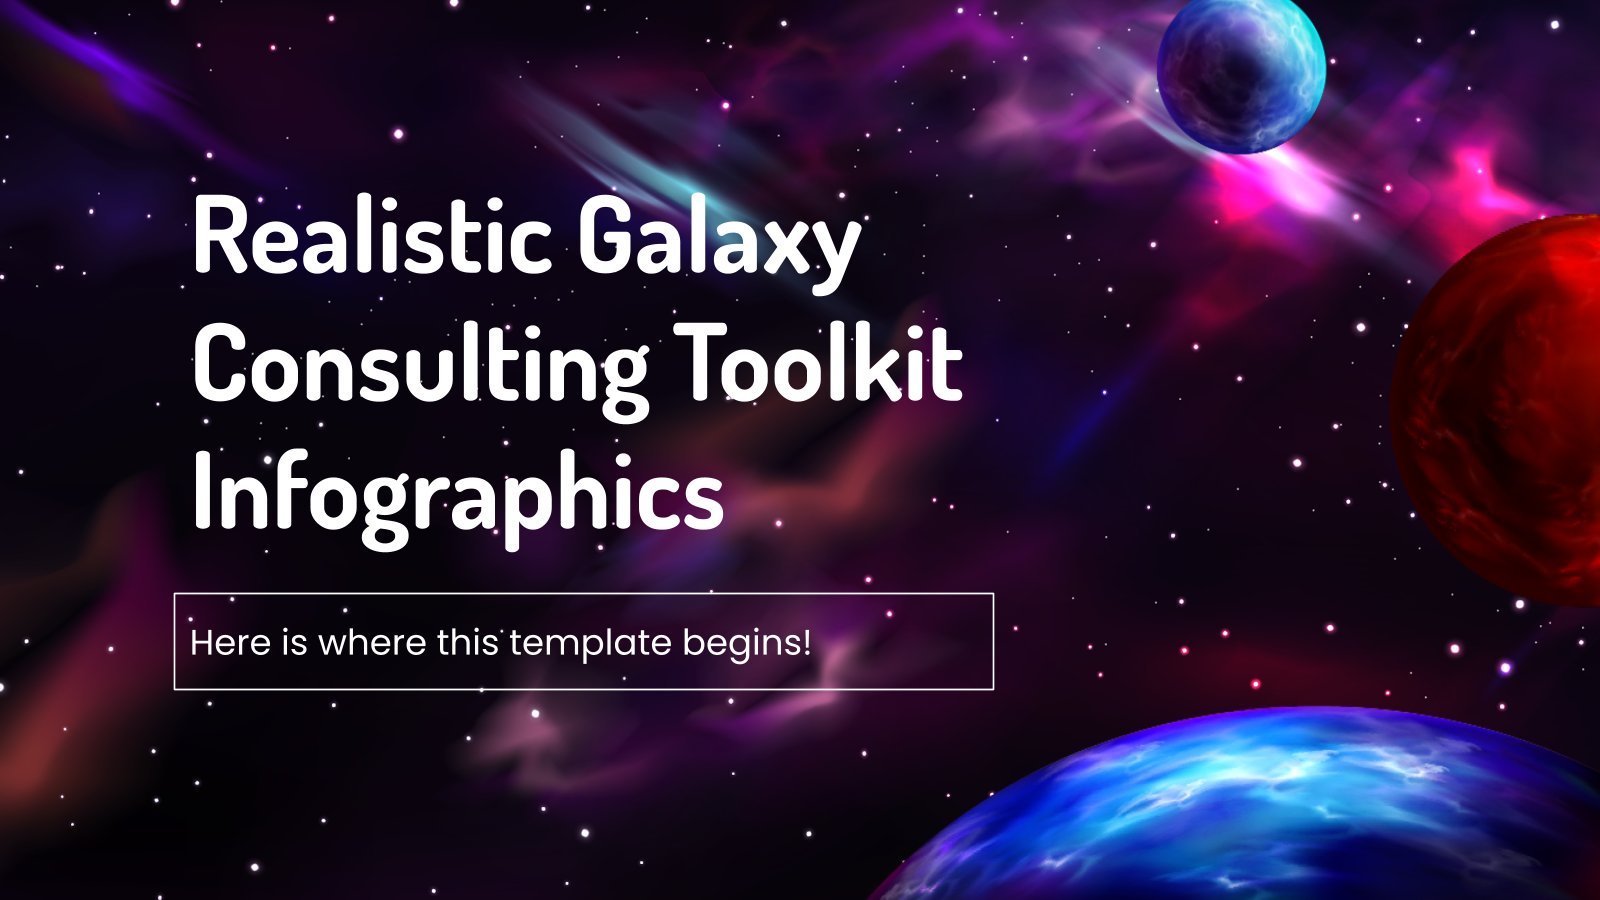 Realistic Galaxy Consulting Toolkit Infographics presentation template 